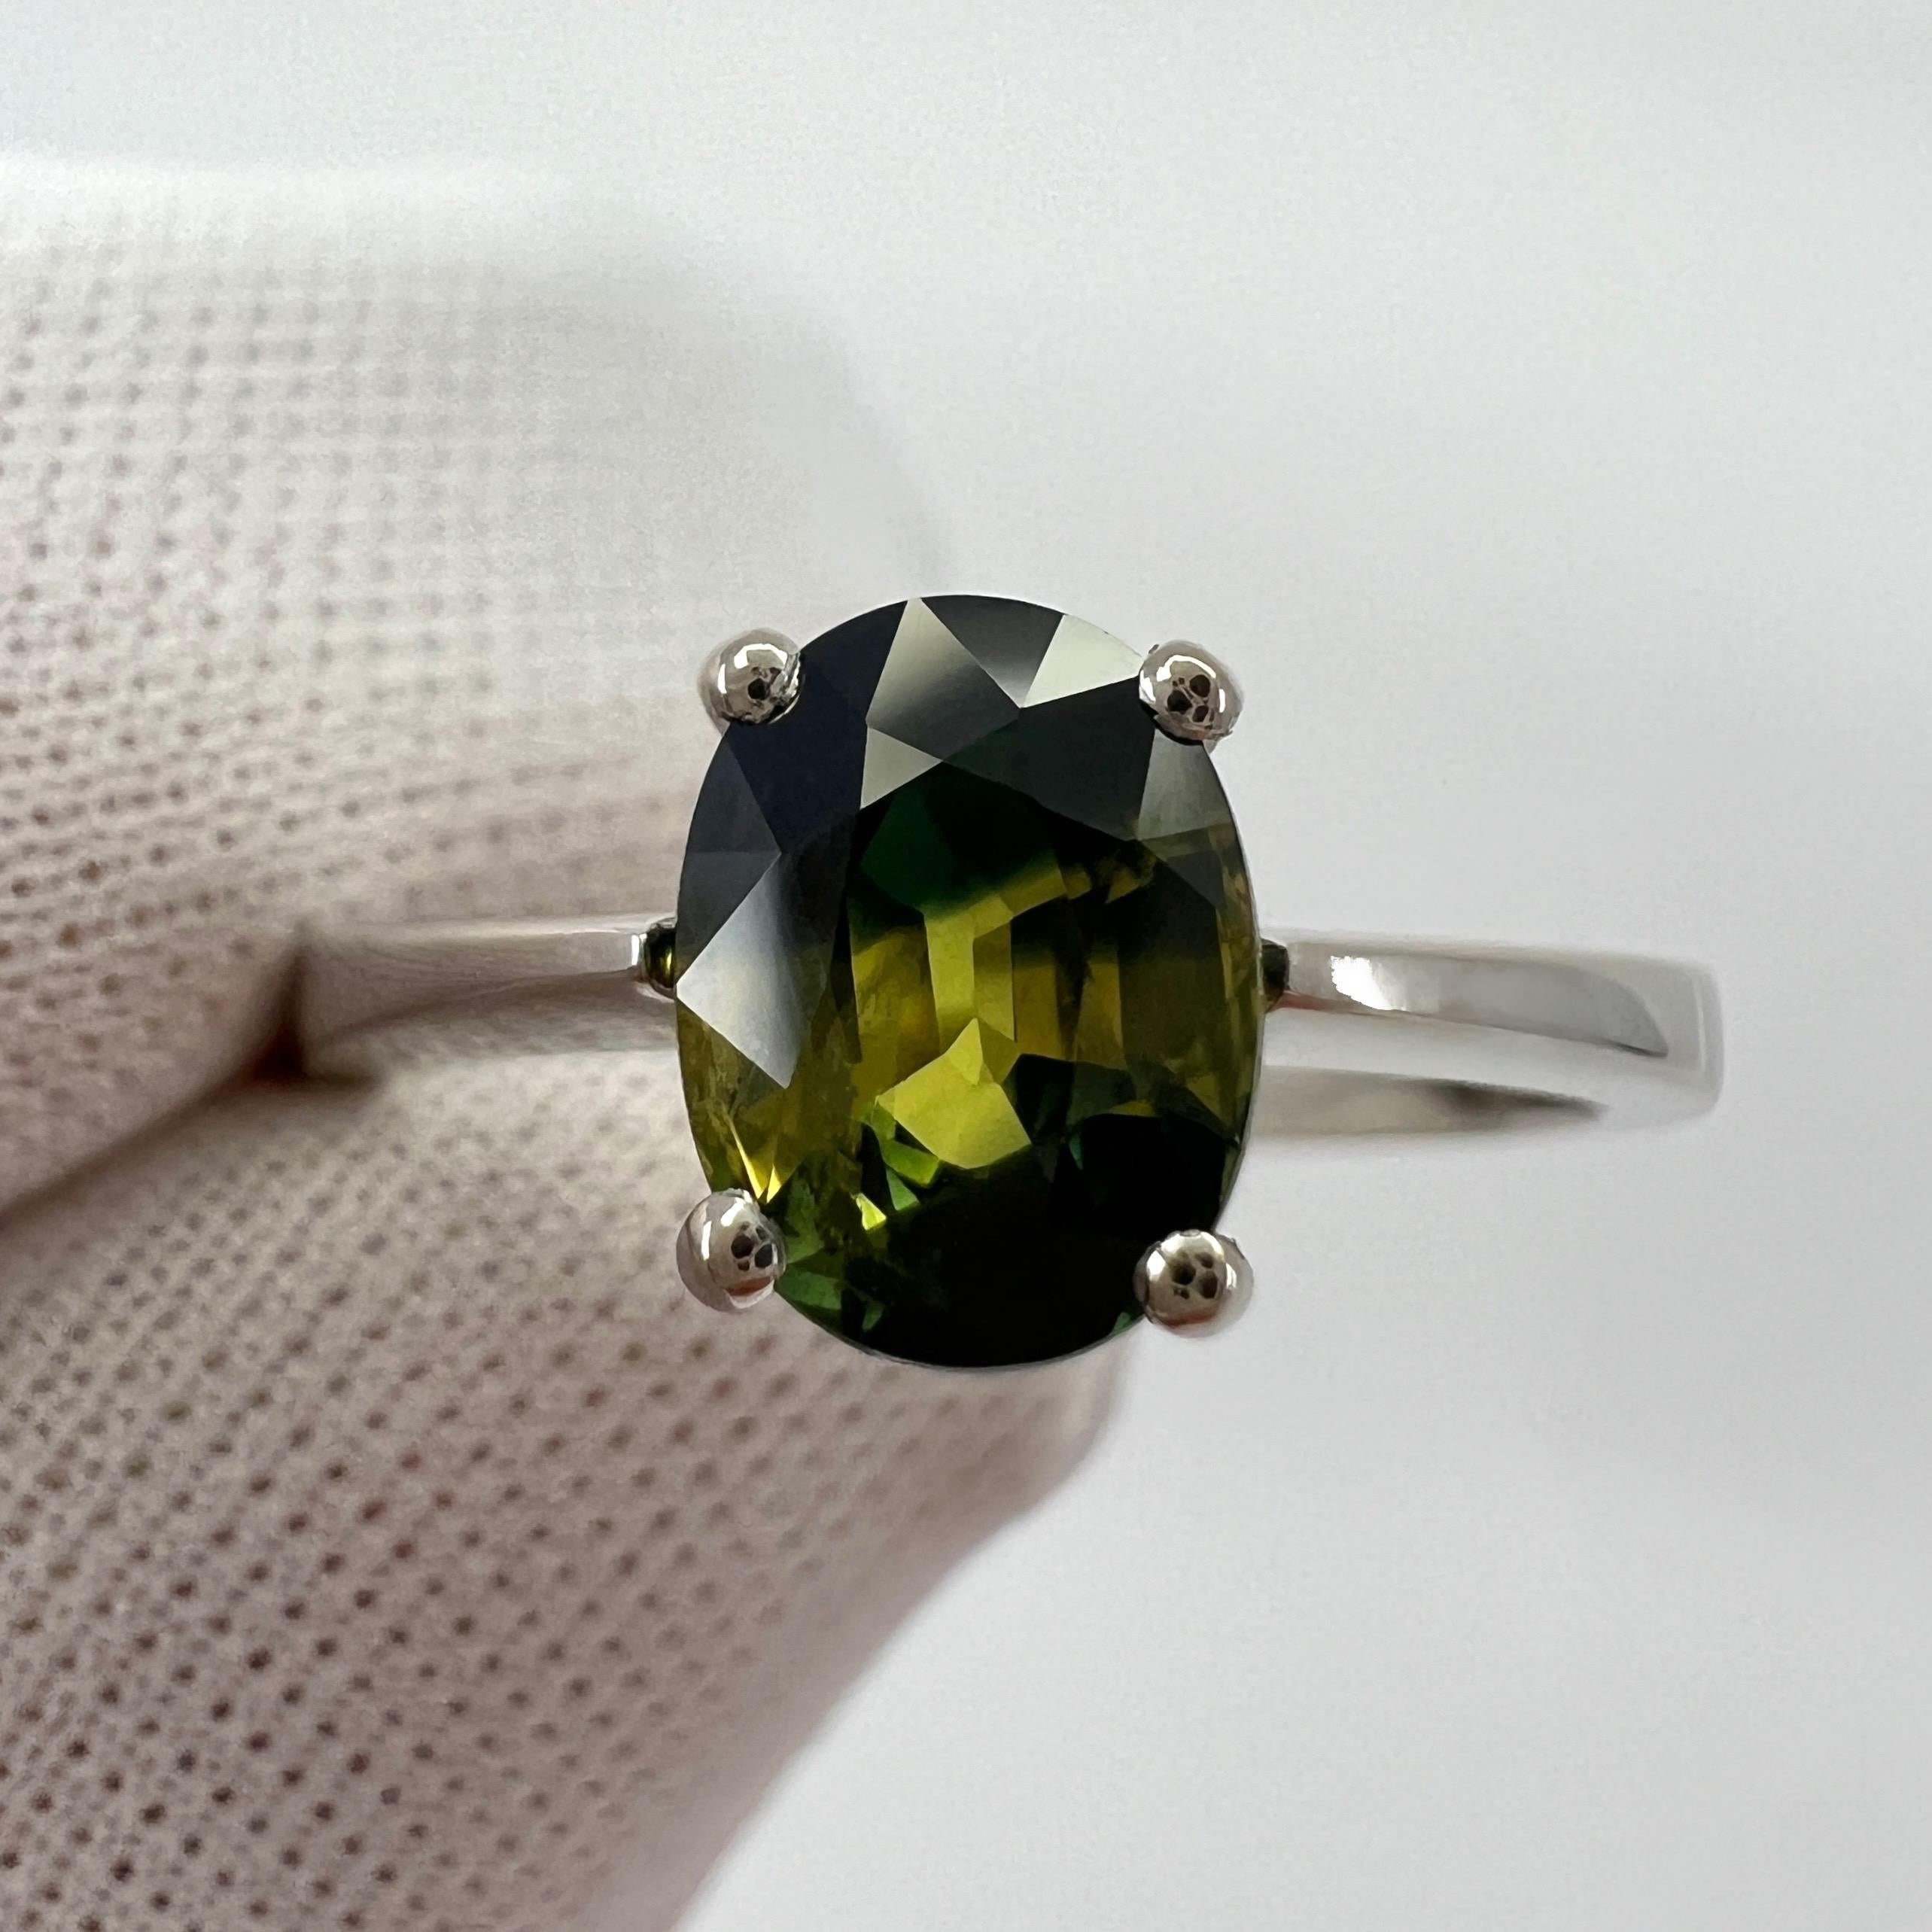 Unique Bi Colour Australian Sapphire 18k White Gold Solitaire Ring.

1.52 Carat stone with a stunning unique bi-colour effect.
Yellow and blue colour split, rare and stunning to see.

Also has very good clarity, clean stone with only some small